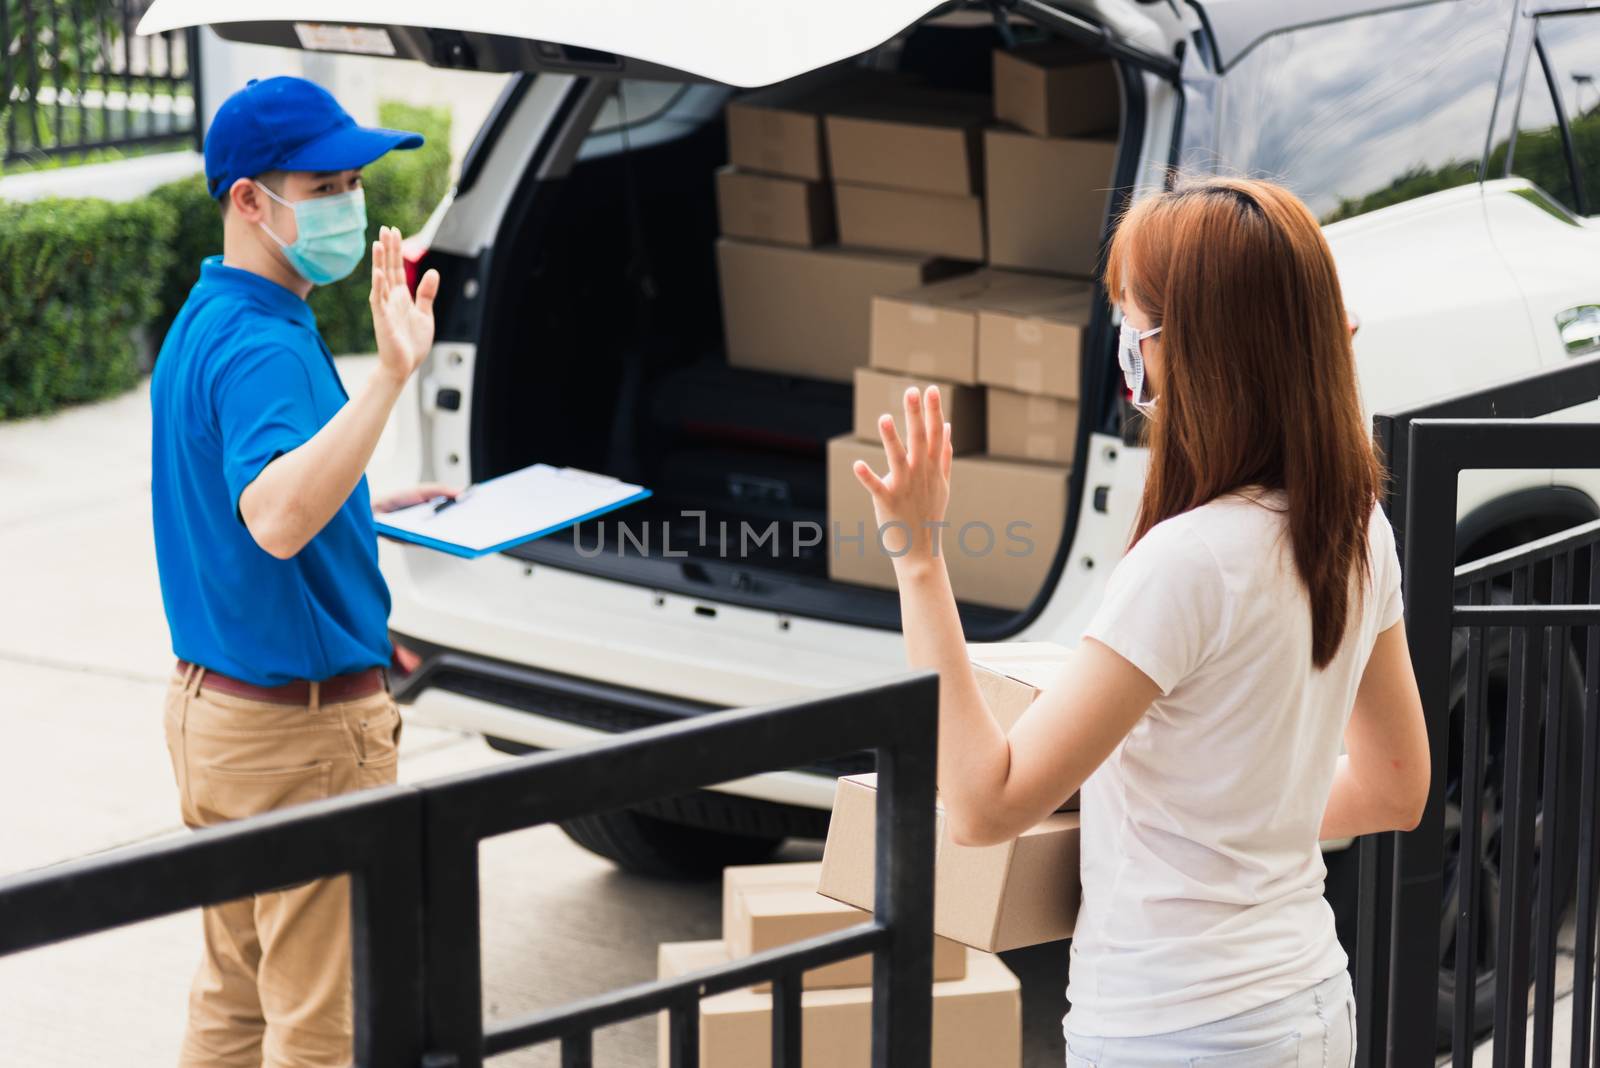 Asian young delivery man raises hand for bye after woman customer received boxes, both protective face mask under curfew quarantine pandemic coronavirus COVID-19 at front home door